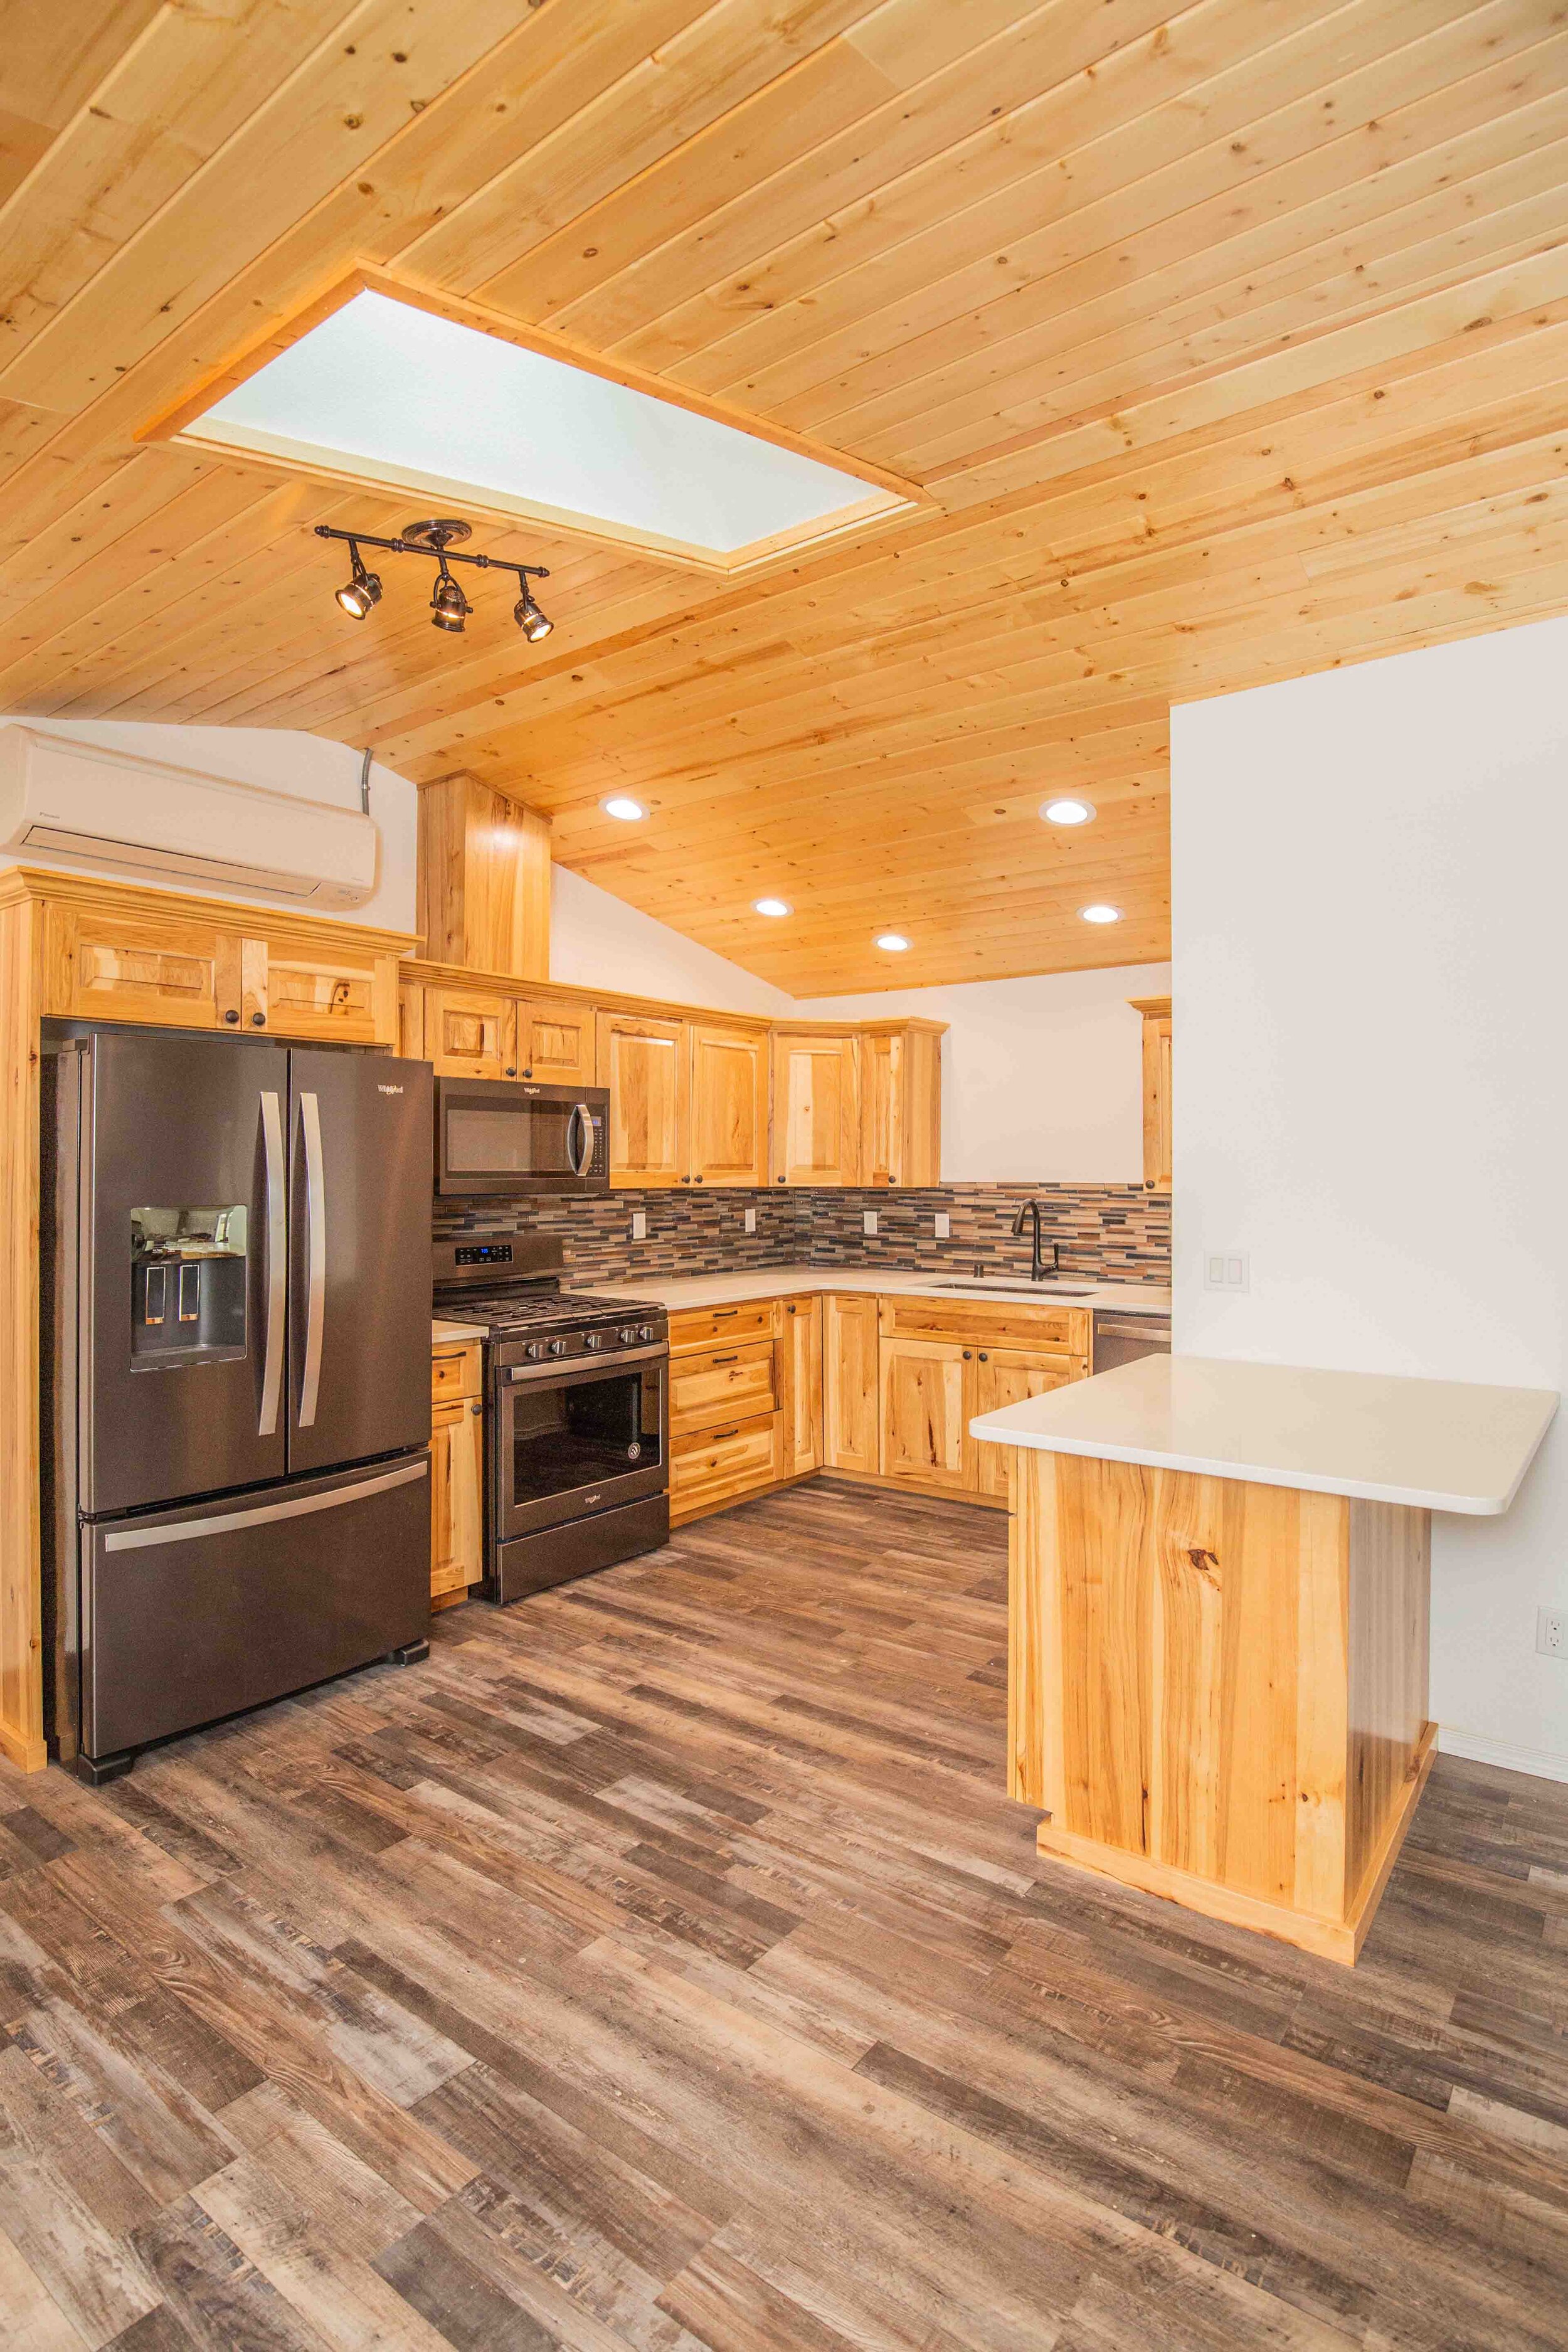 24ResTech's experienced team developed a plan to expand the kitchen's storage by adding cabinetry, developing a better kitchen layout, and adding a peninsula for increased dining space.